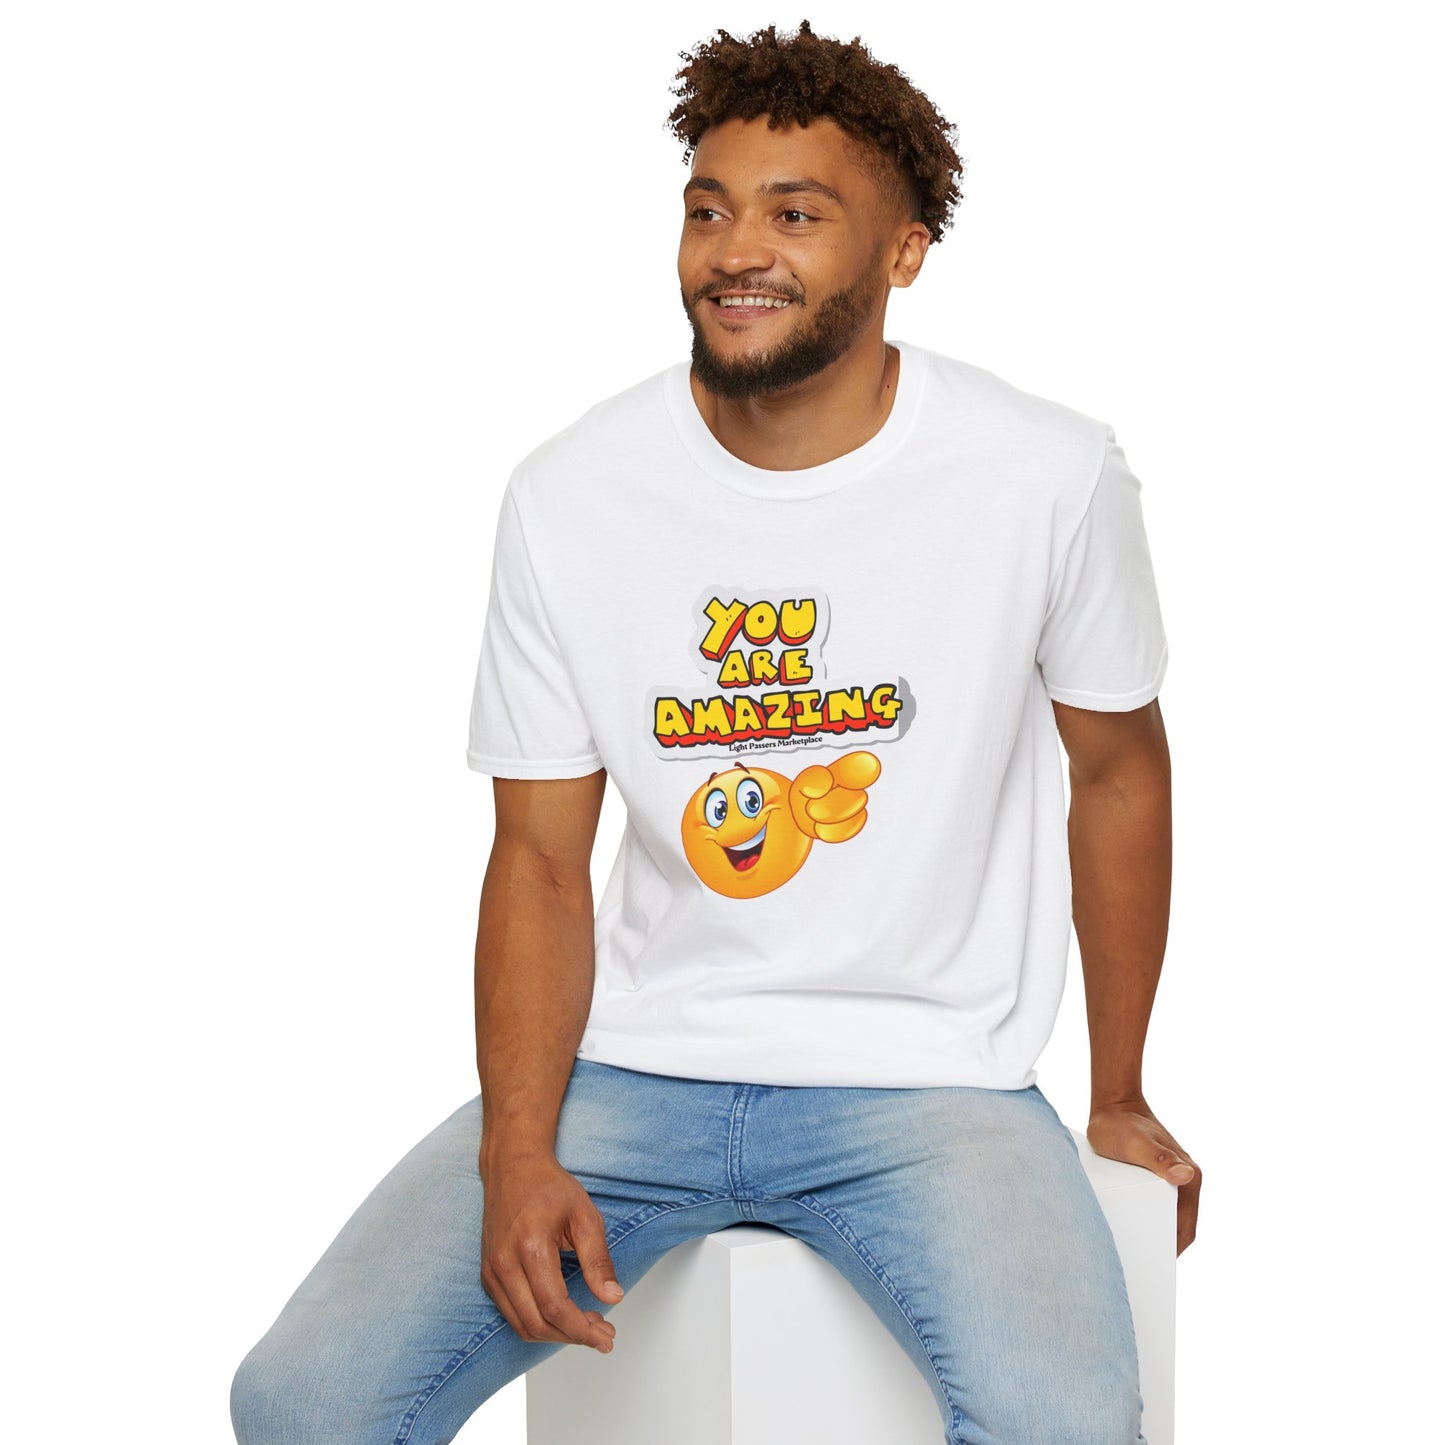 Light Passers Marketplace You are Amazing emoji pointing Unisex Soft T-Shirt Simple Messages, Mental Health